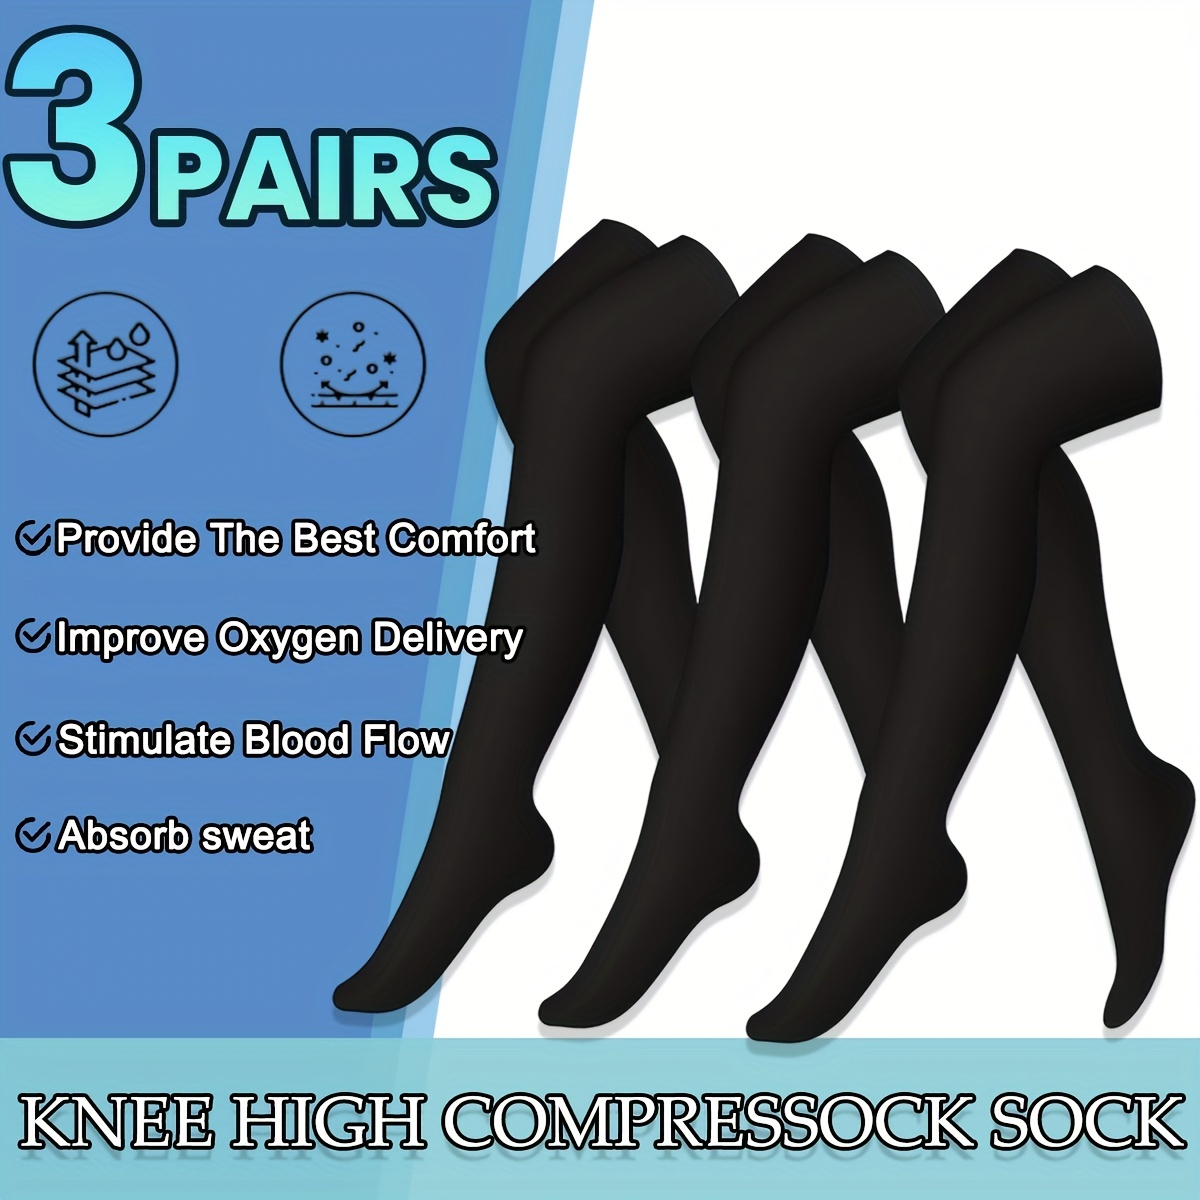 All About Compression Stockings - Ultimate Health Clinic